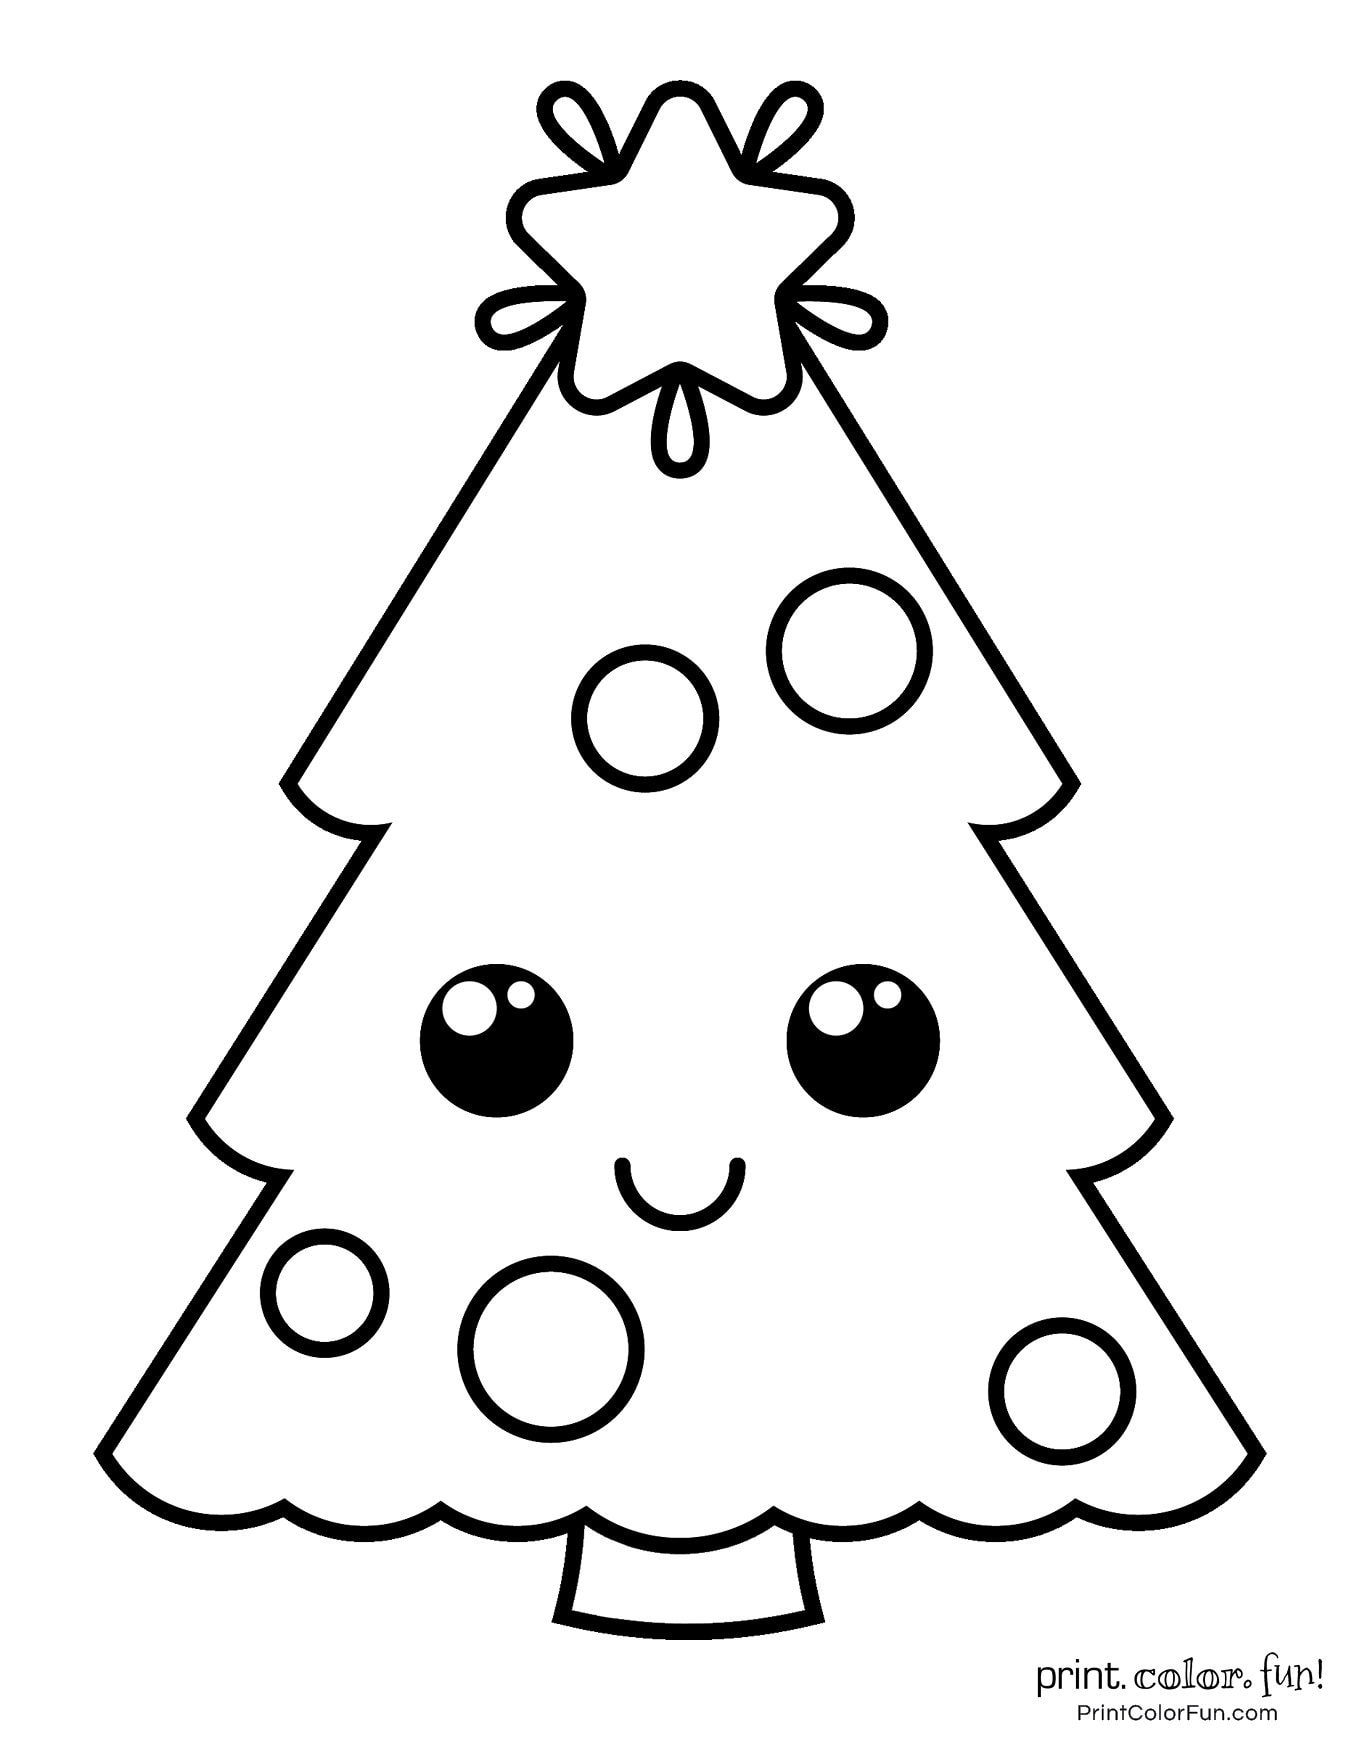 Top 100 Christmas Tree Coloring Pages The Ultimate free Printable Collection Print Color Fun 